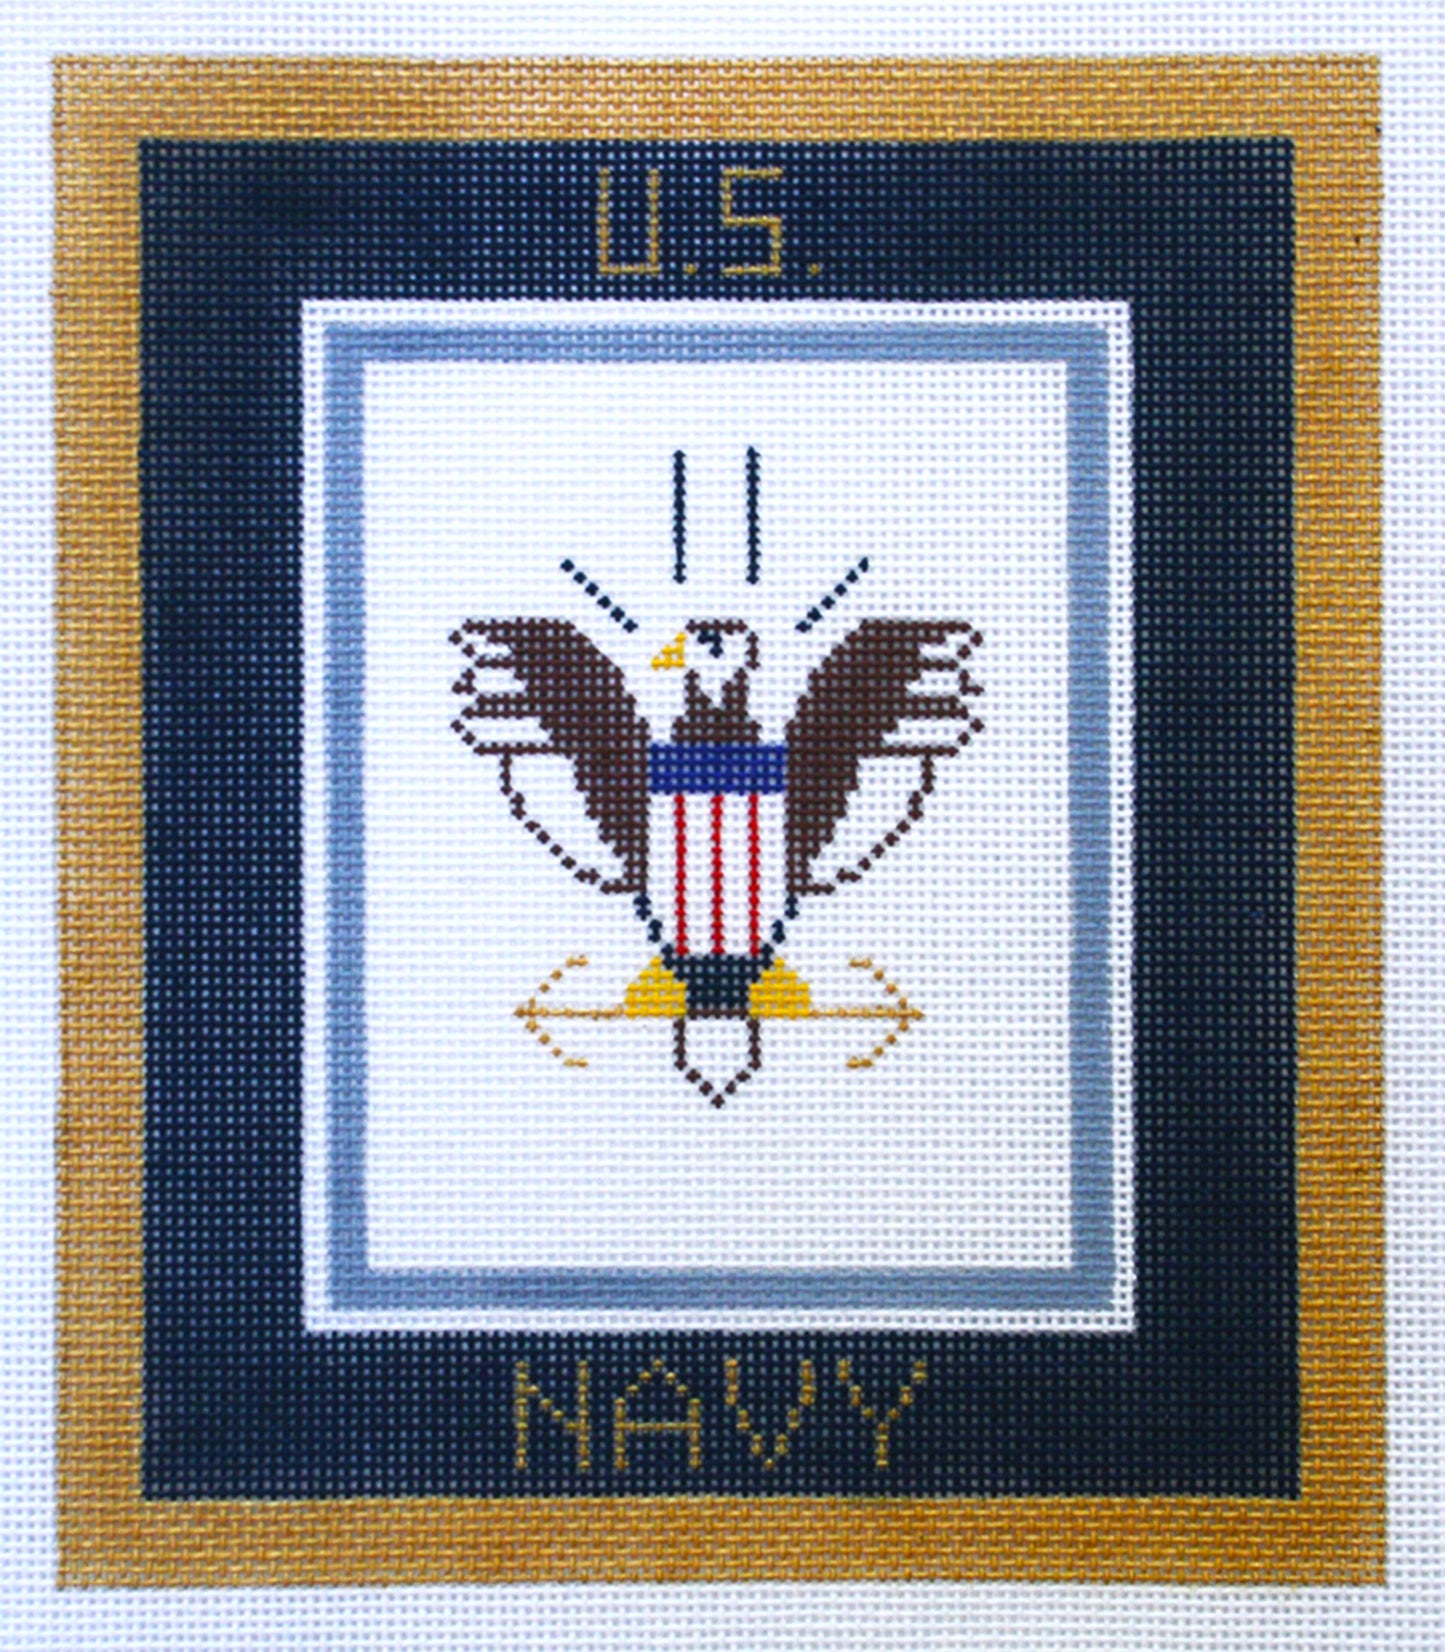 Military ~ NAVY Military 6" x 7" handpainted Needlepoint Canvas by LEE Needle Arts